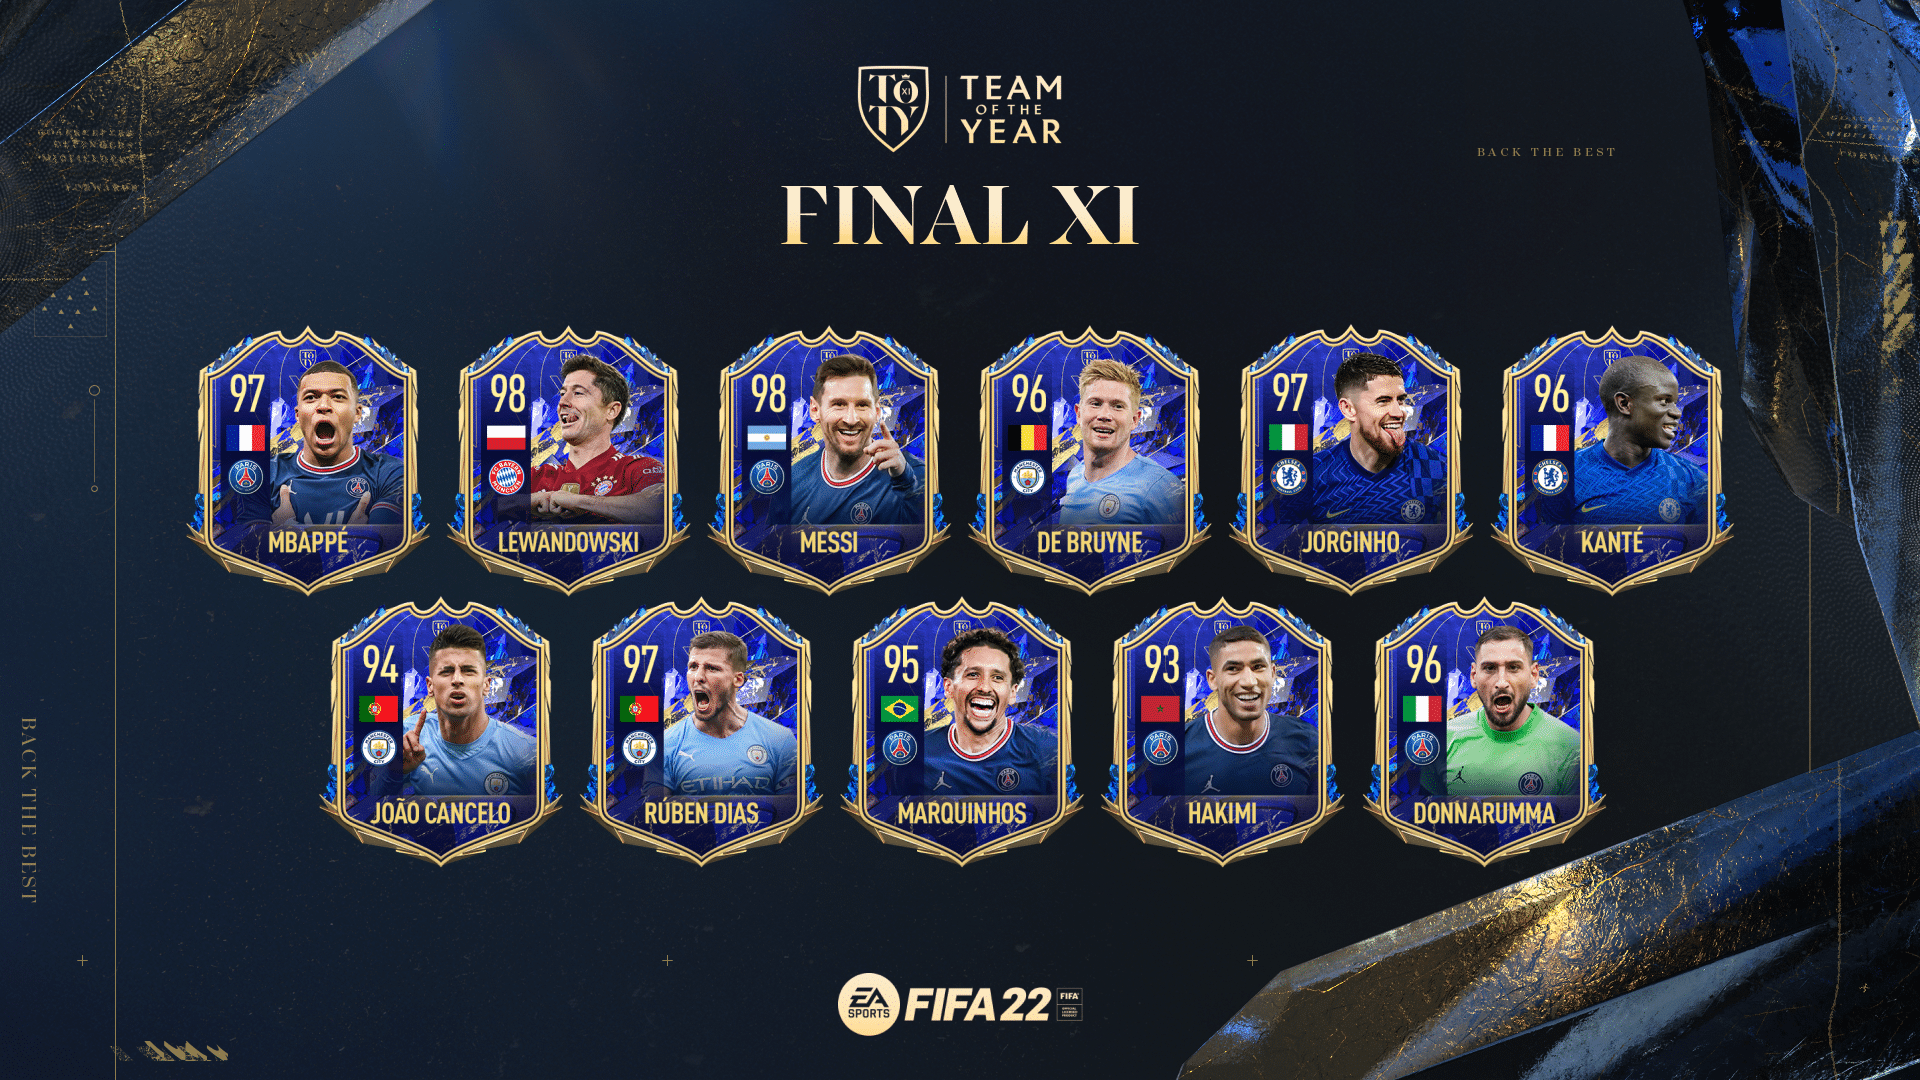 Here are the eleven owners of the TOTY team voted by FIFA 22 thumbnail users